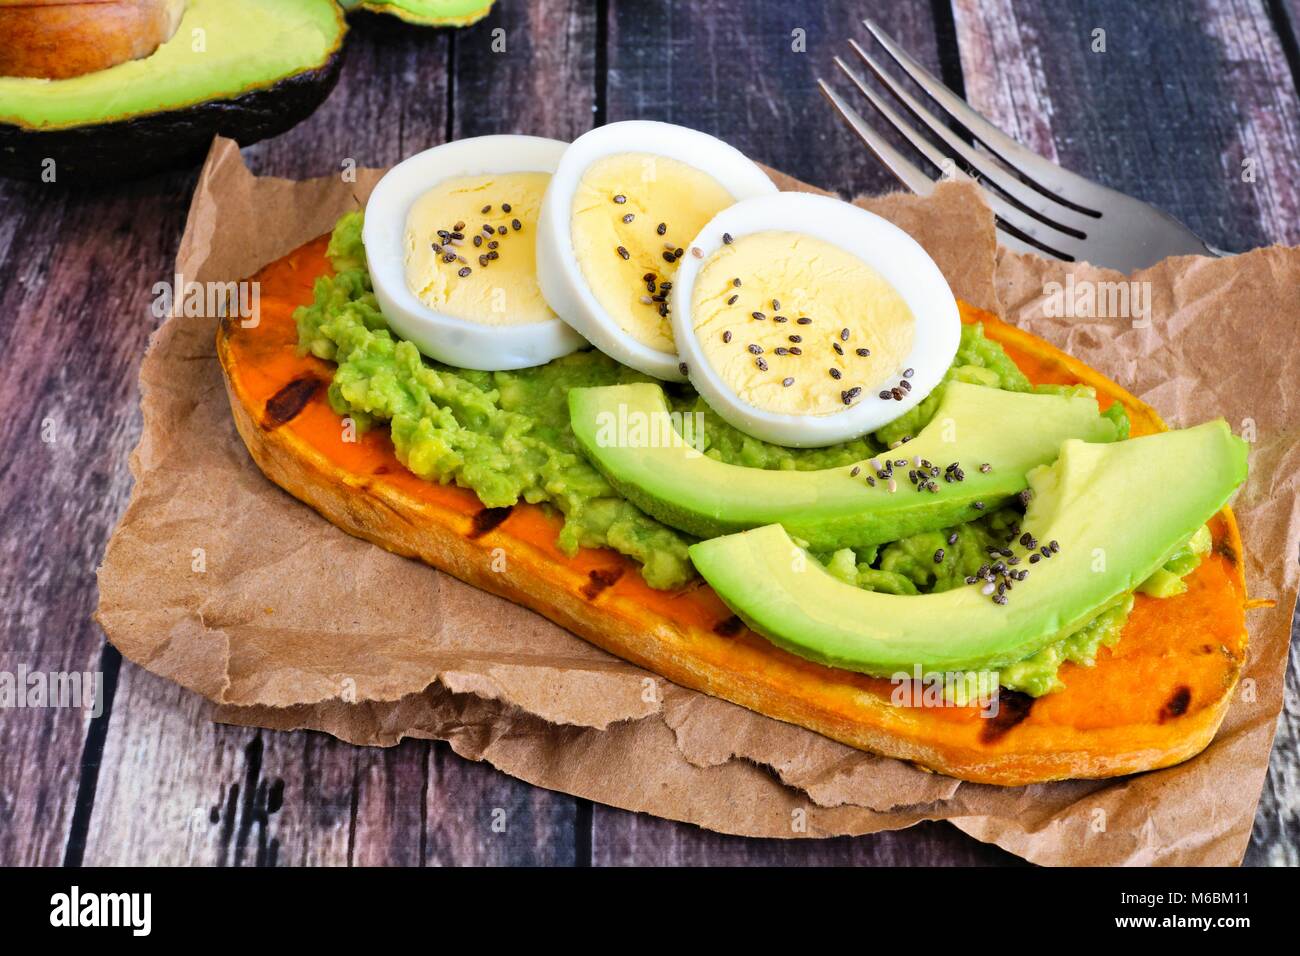 Sweet potato toast with avocado, eggs and chia seeds. Table scene with a wooden background. Stock Photo